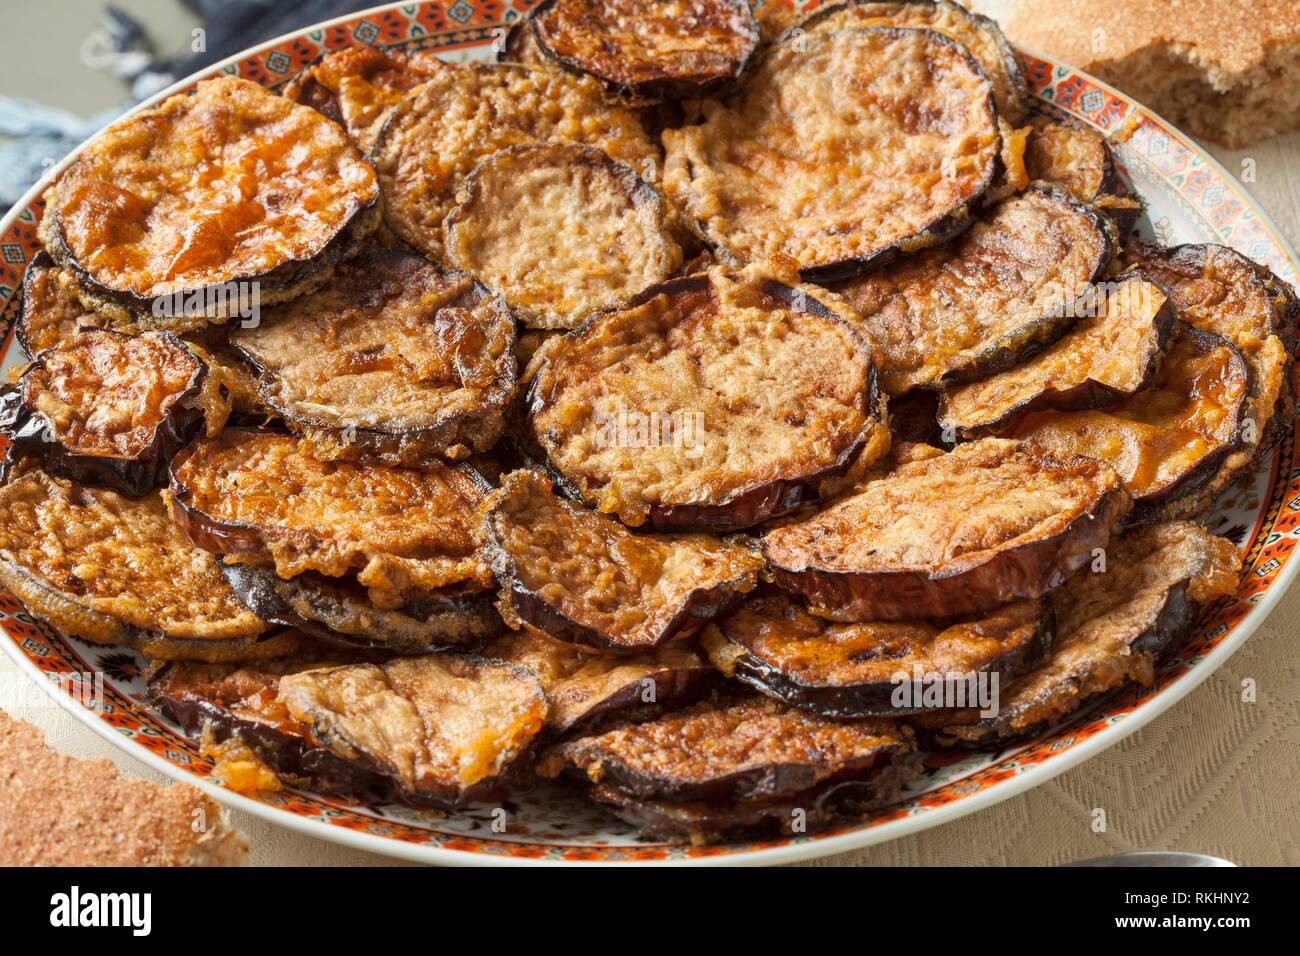 Colorful dish with baked eggplant close up. Stock Photo